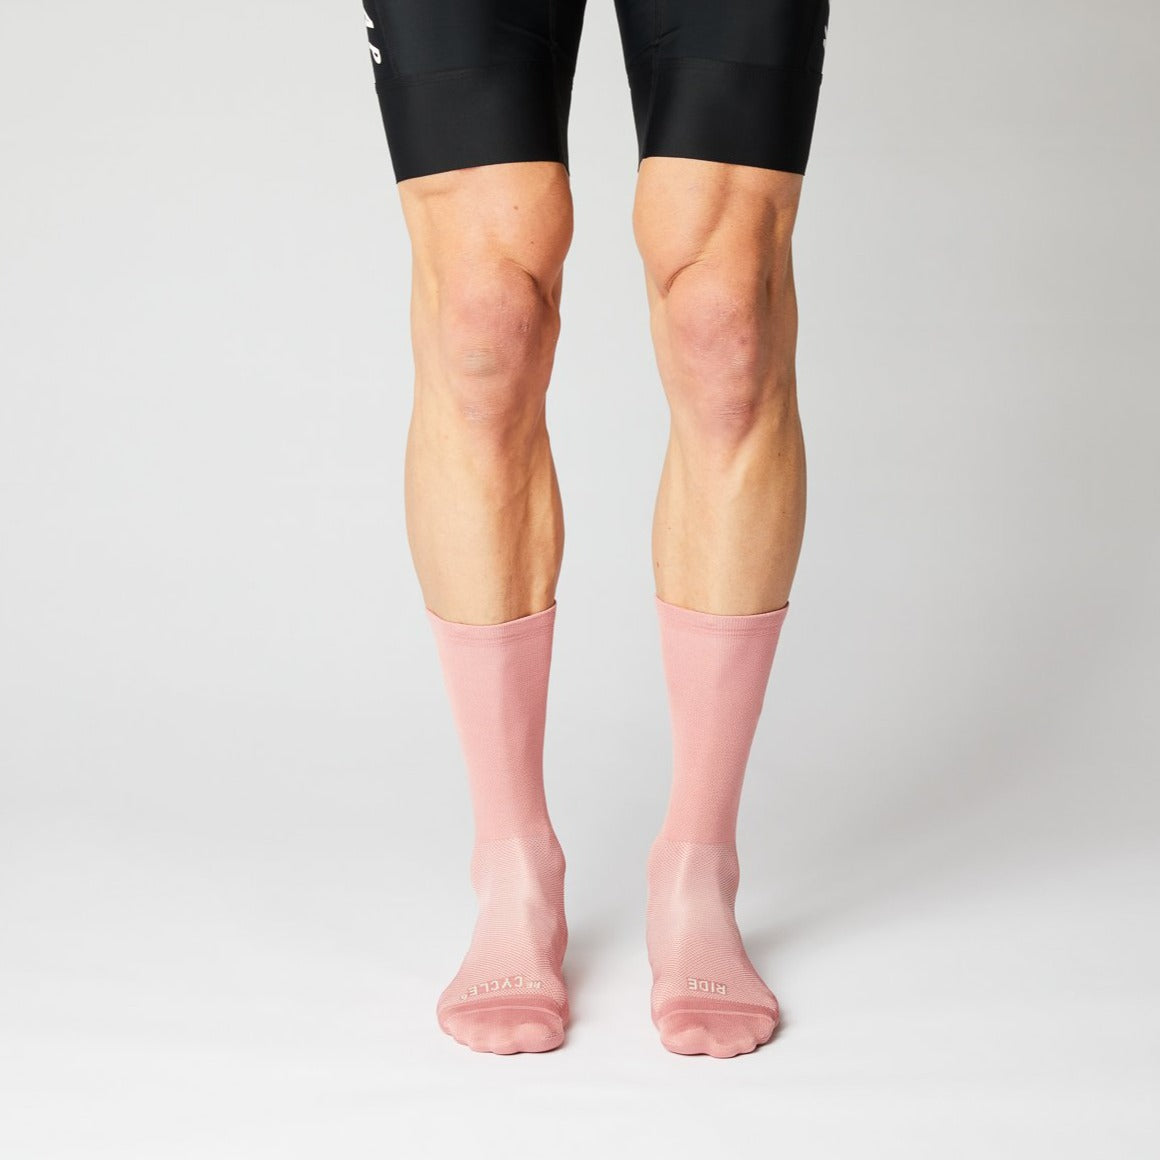 Chaussettes Eco - Dusty Rose